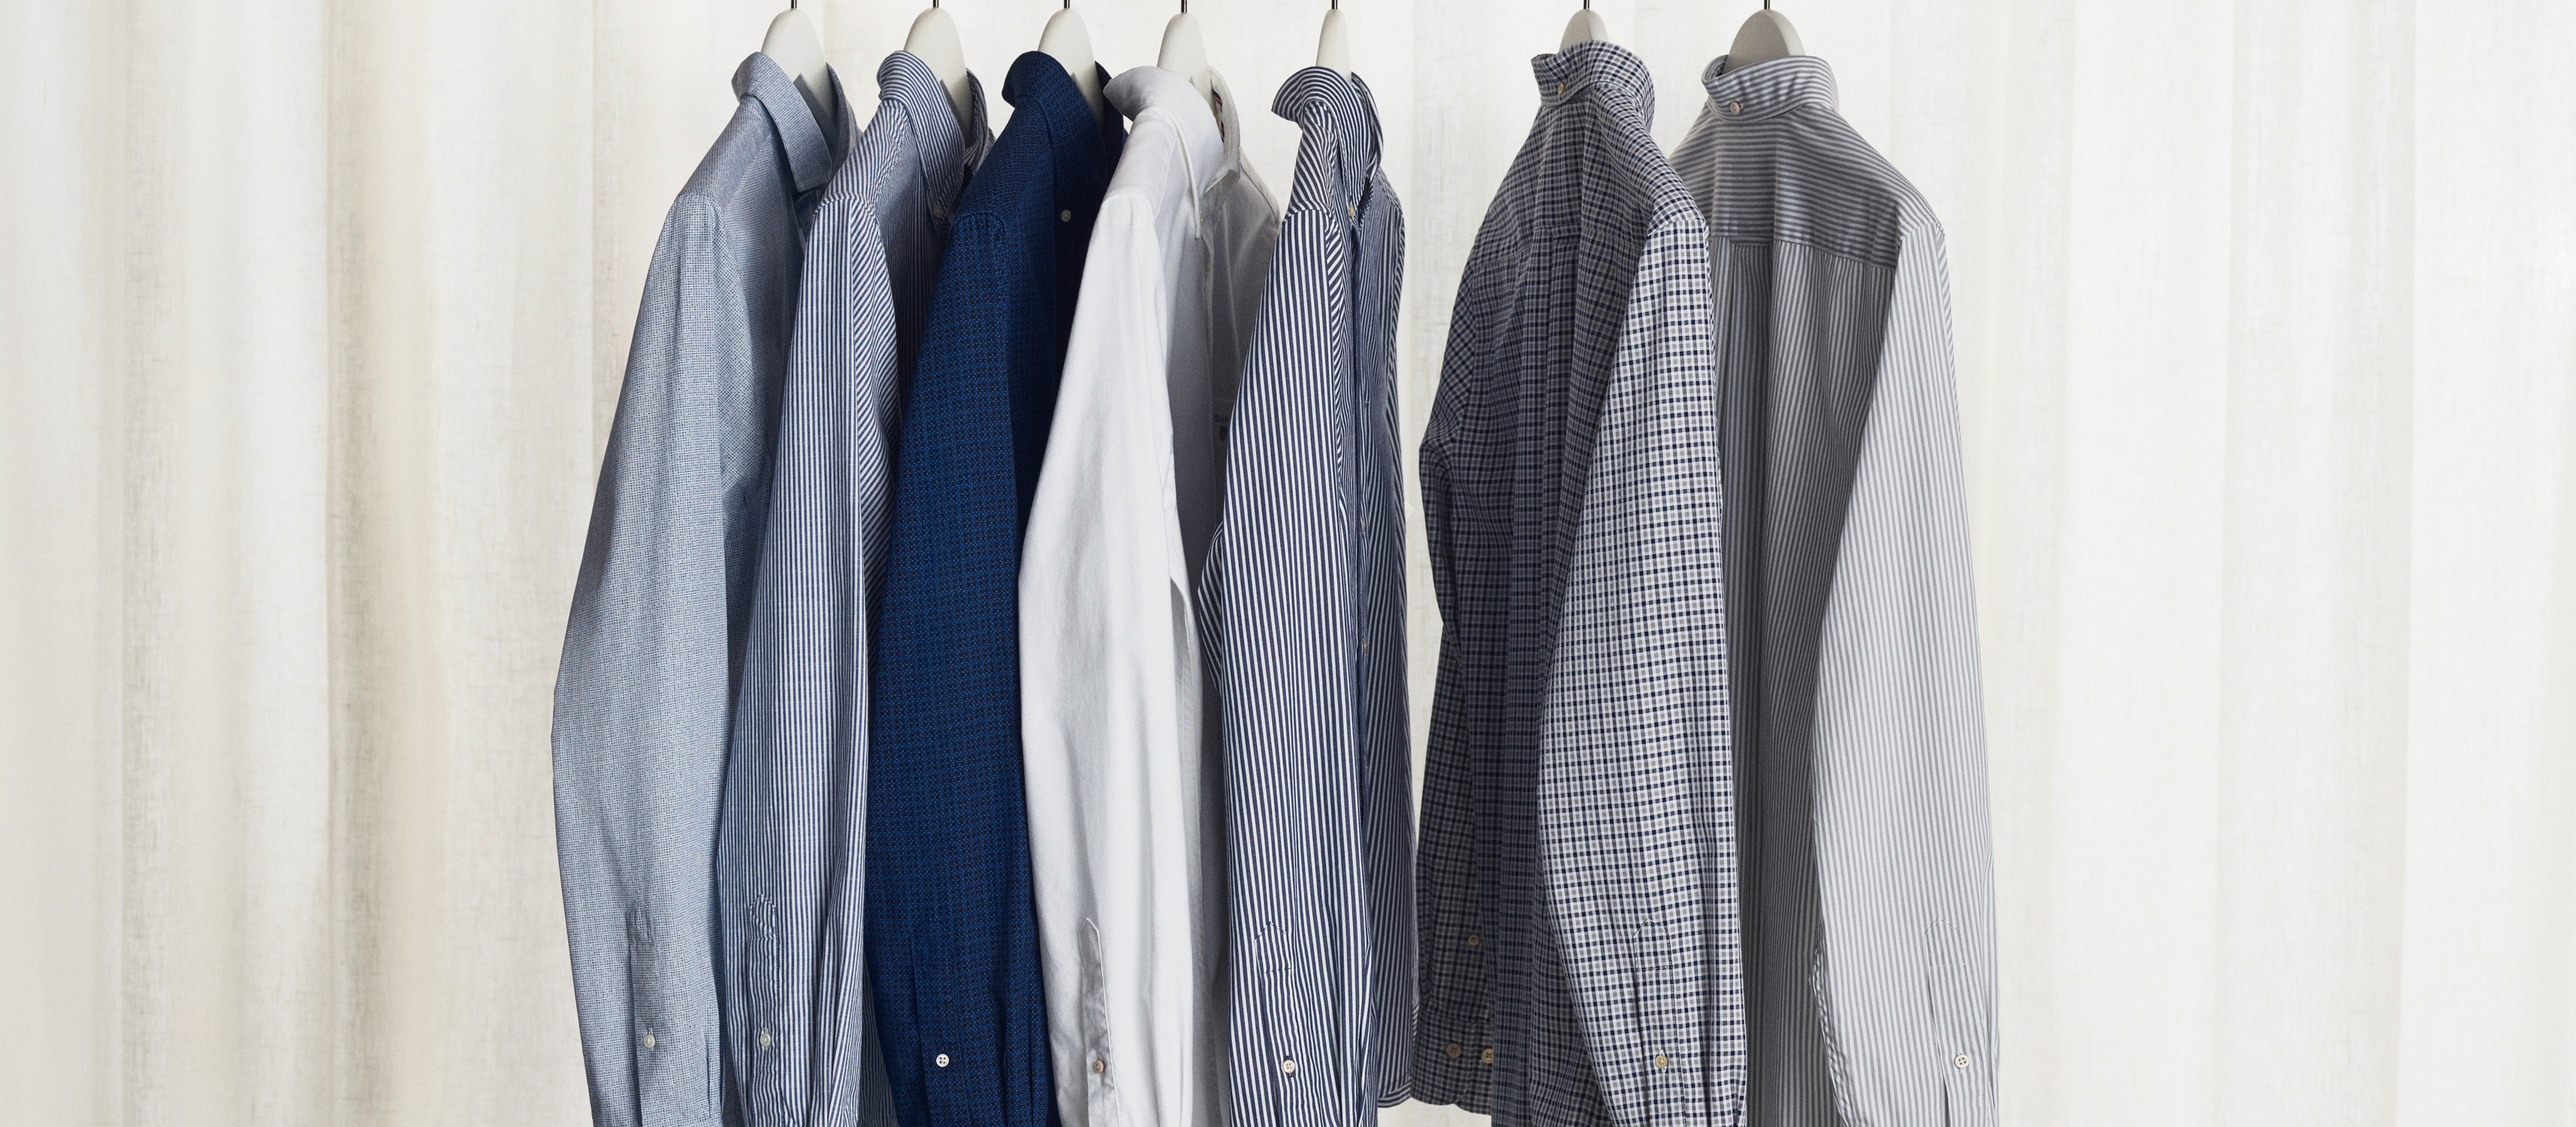 The Anatomy of the Shirt with GANT